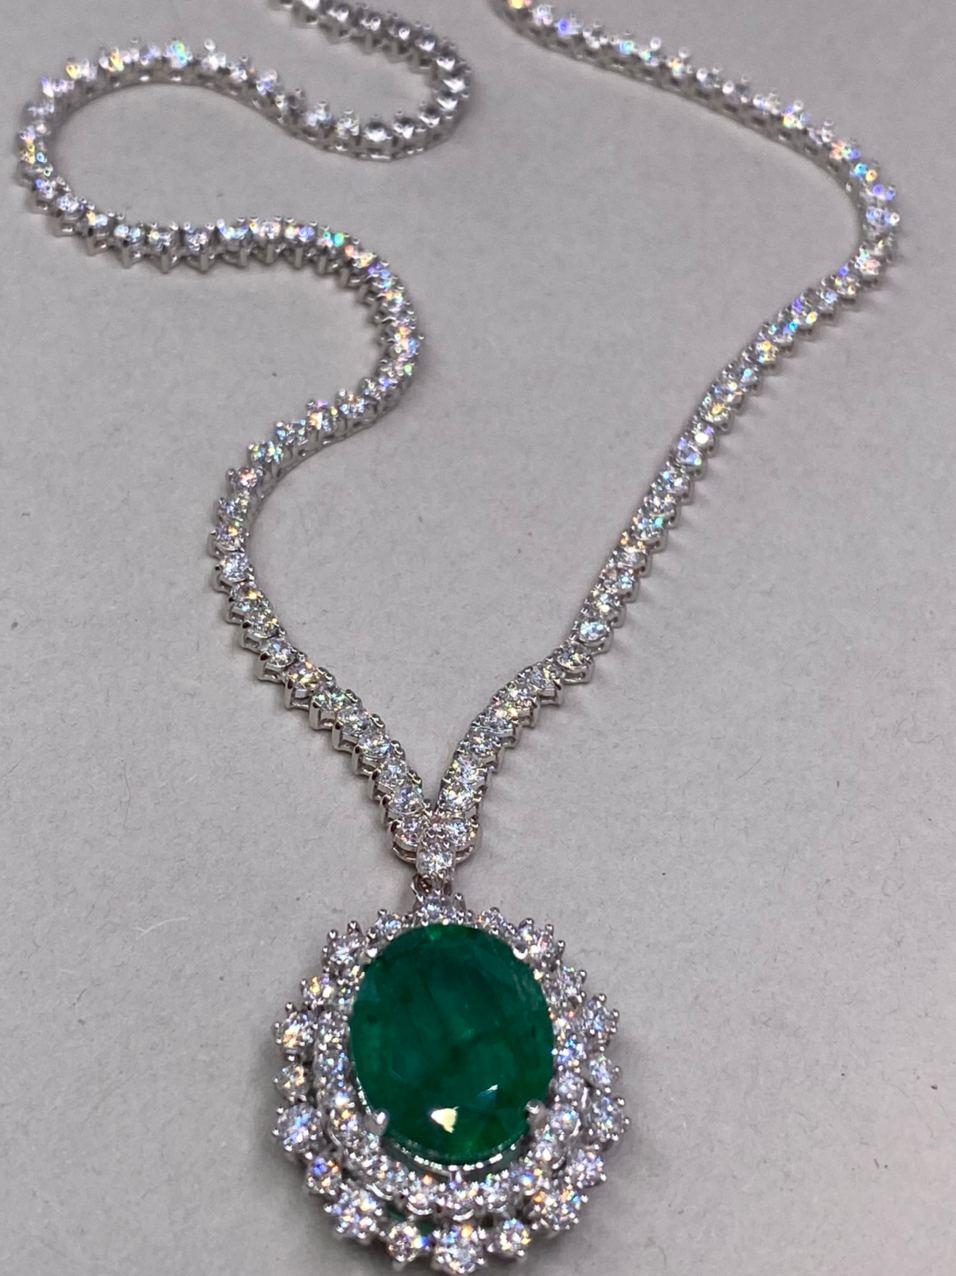 9.45 CTW Emerald 18K White Gold Diamond Necklace

Total Necklace Weight: 15.5 Grams
Necklace Length: 40.6 cm (16 Inches)
Emerald Weight: 5.25 Carat (12.701x10.00 Millimeters)
Diamond Weight: 4.20 Carat (F-G Color, VS2-SI1 Clarity)

With a heritage